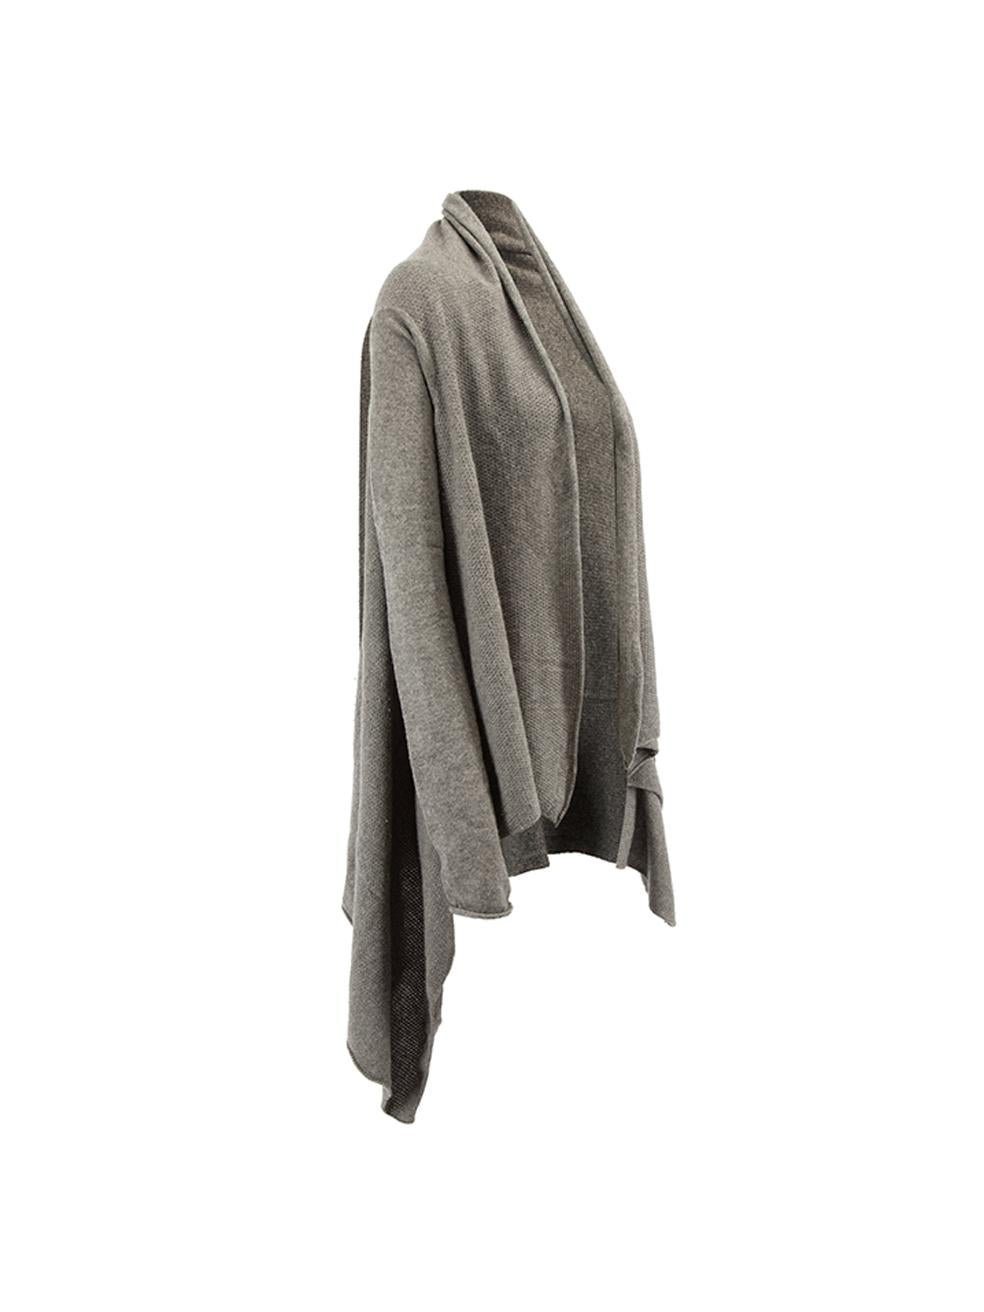 CONDITION is Very good. Minimal wear to cardigan is evident. Minimal wear and pilling to the cashmere fabric on this used Zadig & Voltaire designer resale item. 



Details


Grey

Cashmere

Knitted cardigan

Mid length

Open front

Long